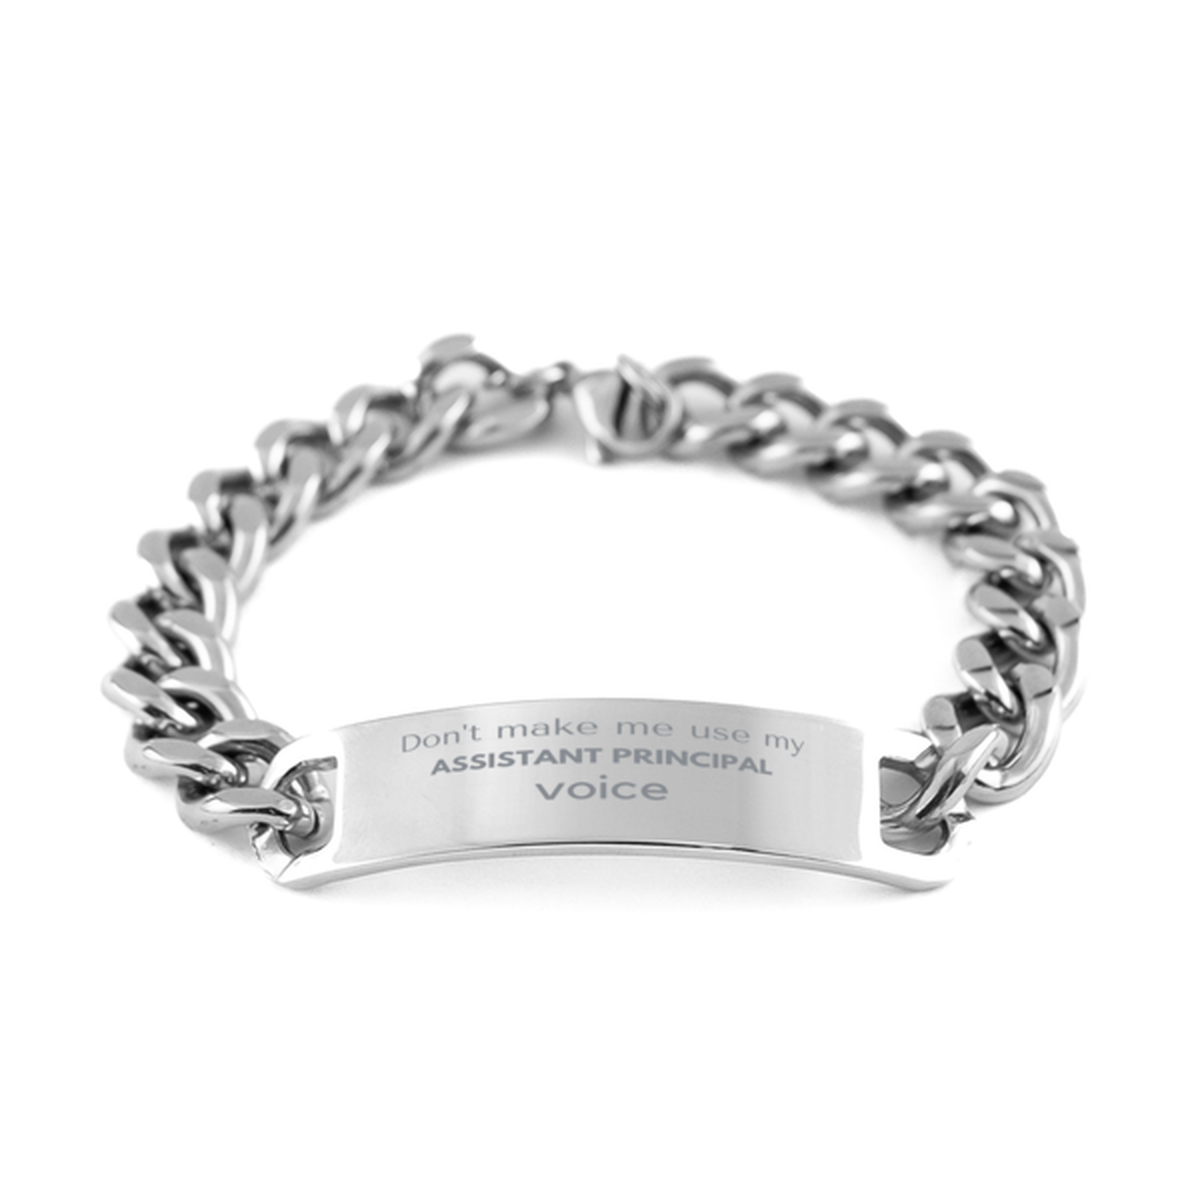 Don't make me use my Assistant Principal voice, Sarcasm Assistant Principal Gifts, Christmas Assistant Principal Cuban Chain Stainless Steel Bracelet Birthday Unique Gifts For Assistant Principal Coworkers, Men, Women, Colleague, Friends